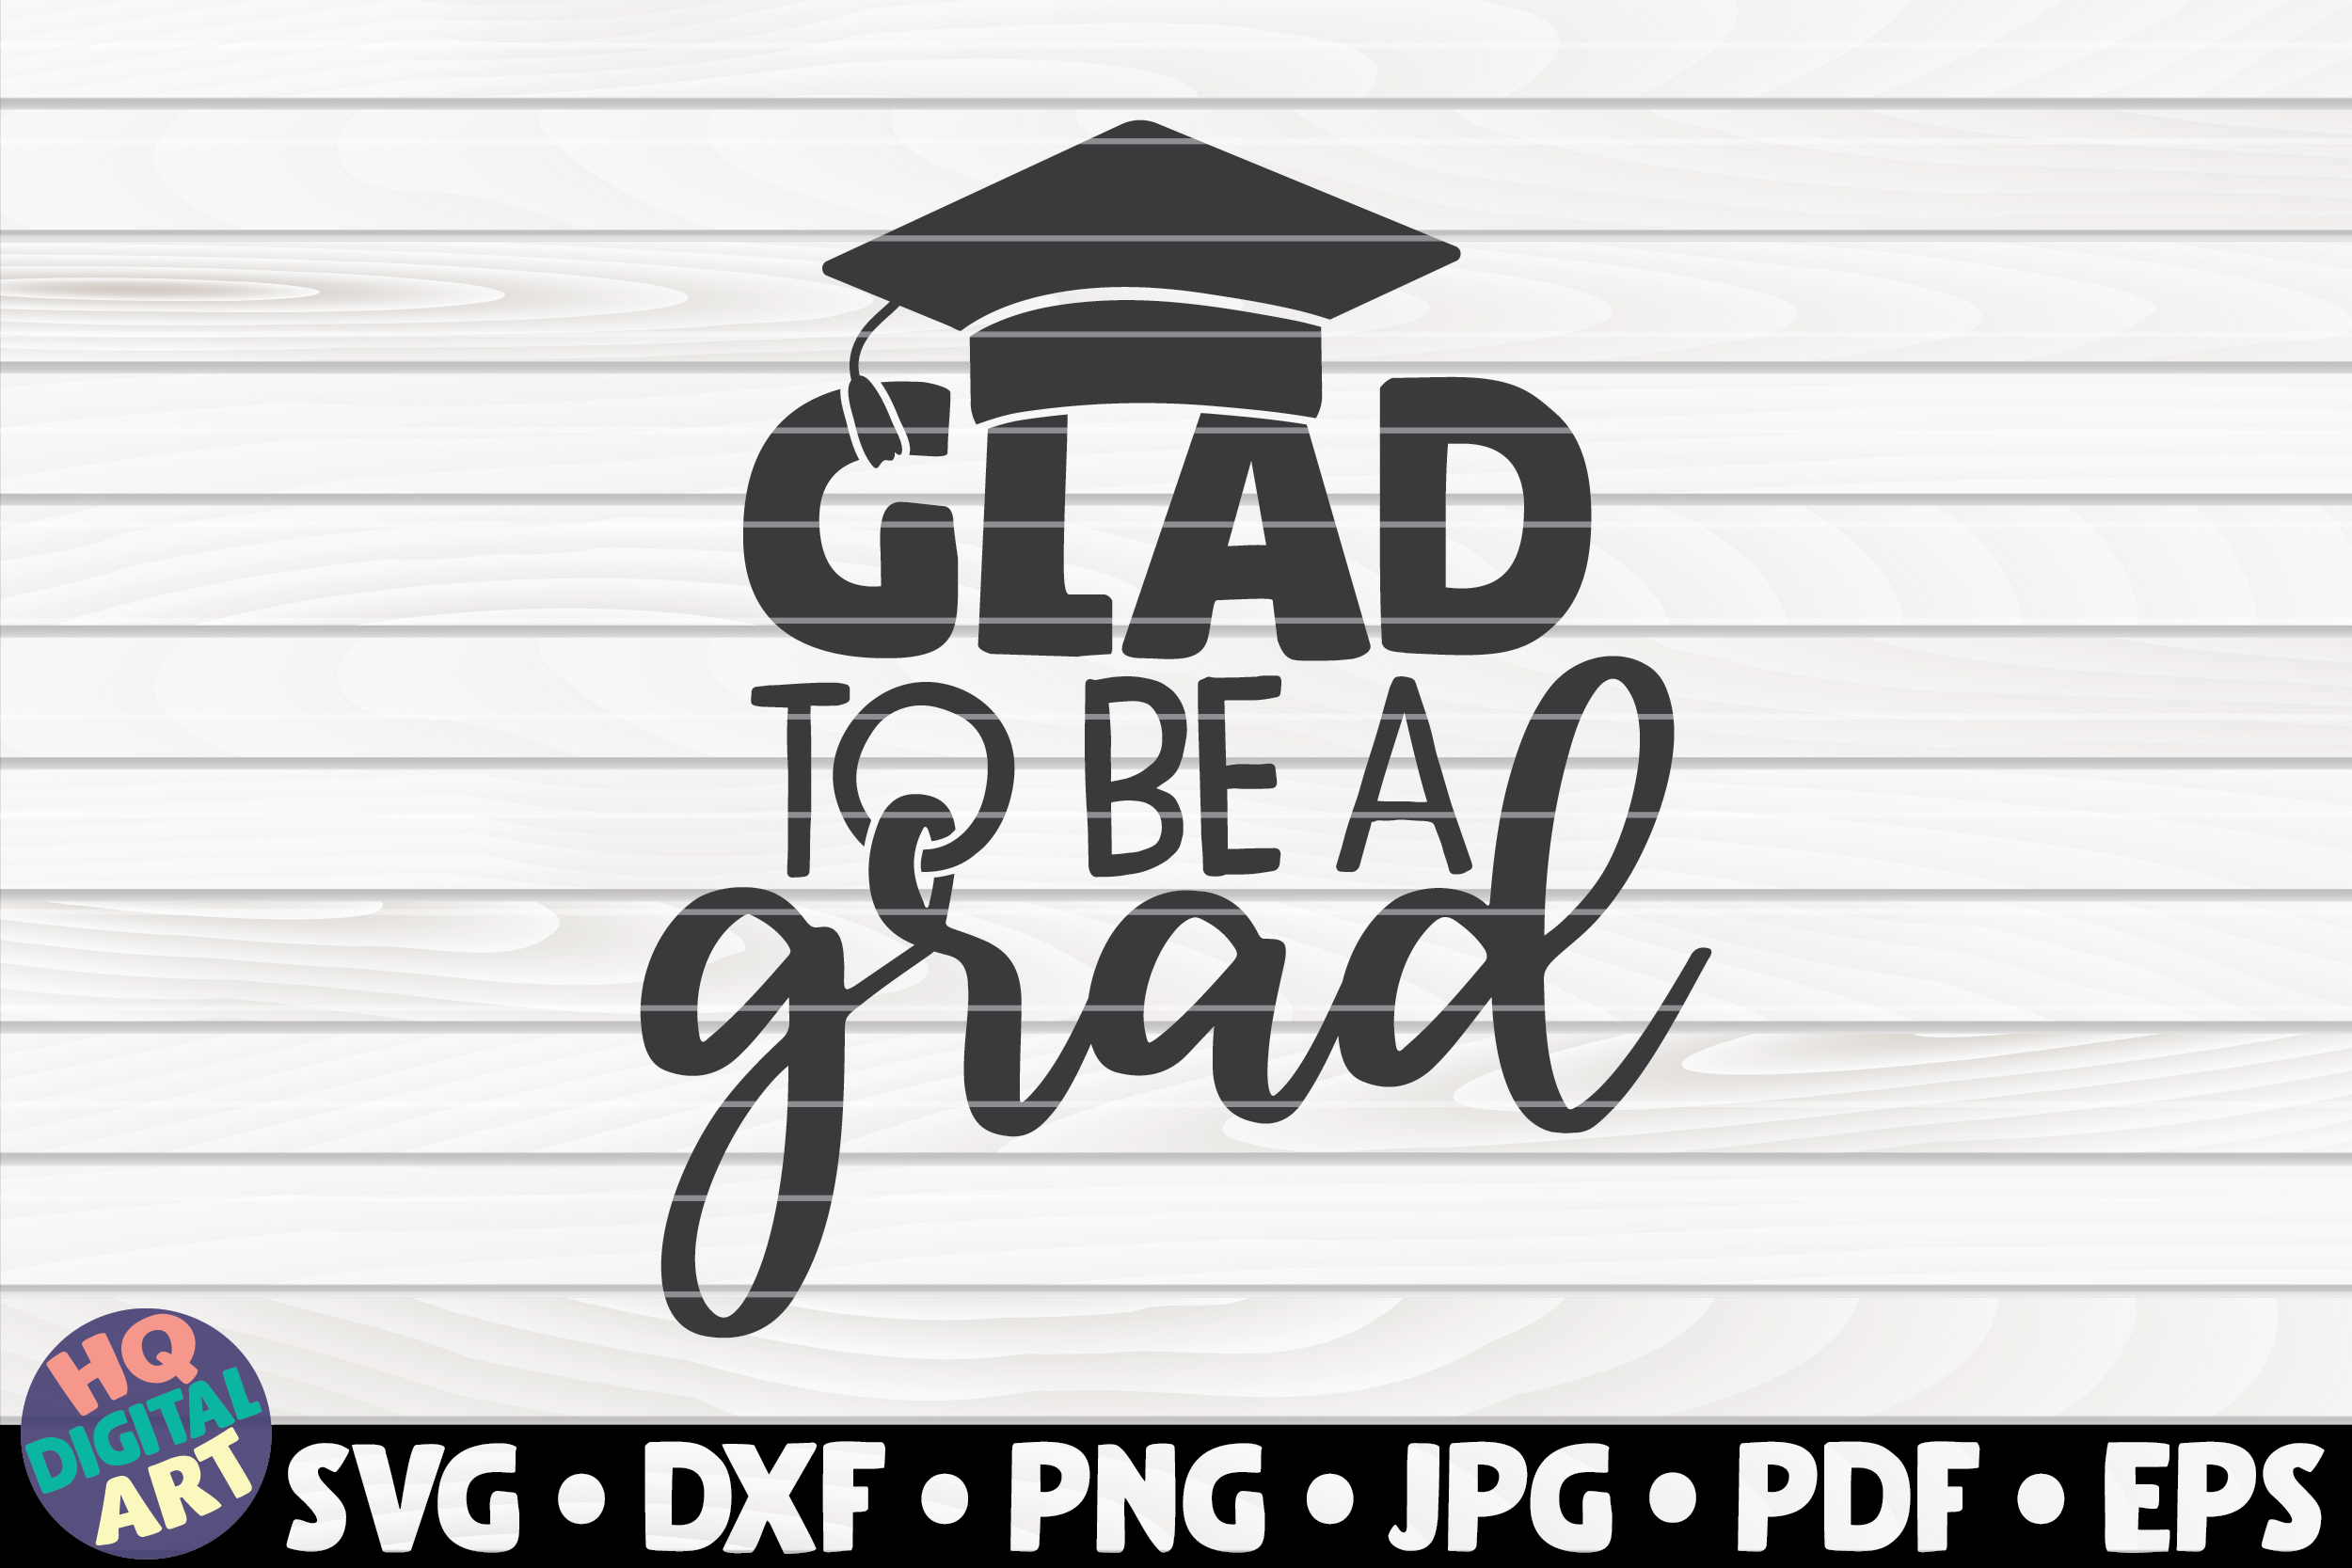 Download Glad to be a grad SVG | Graduation quote By HQDigitalArt ...